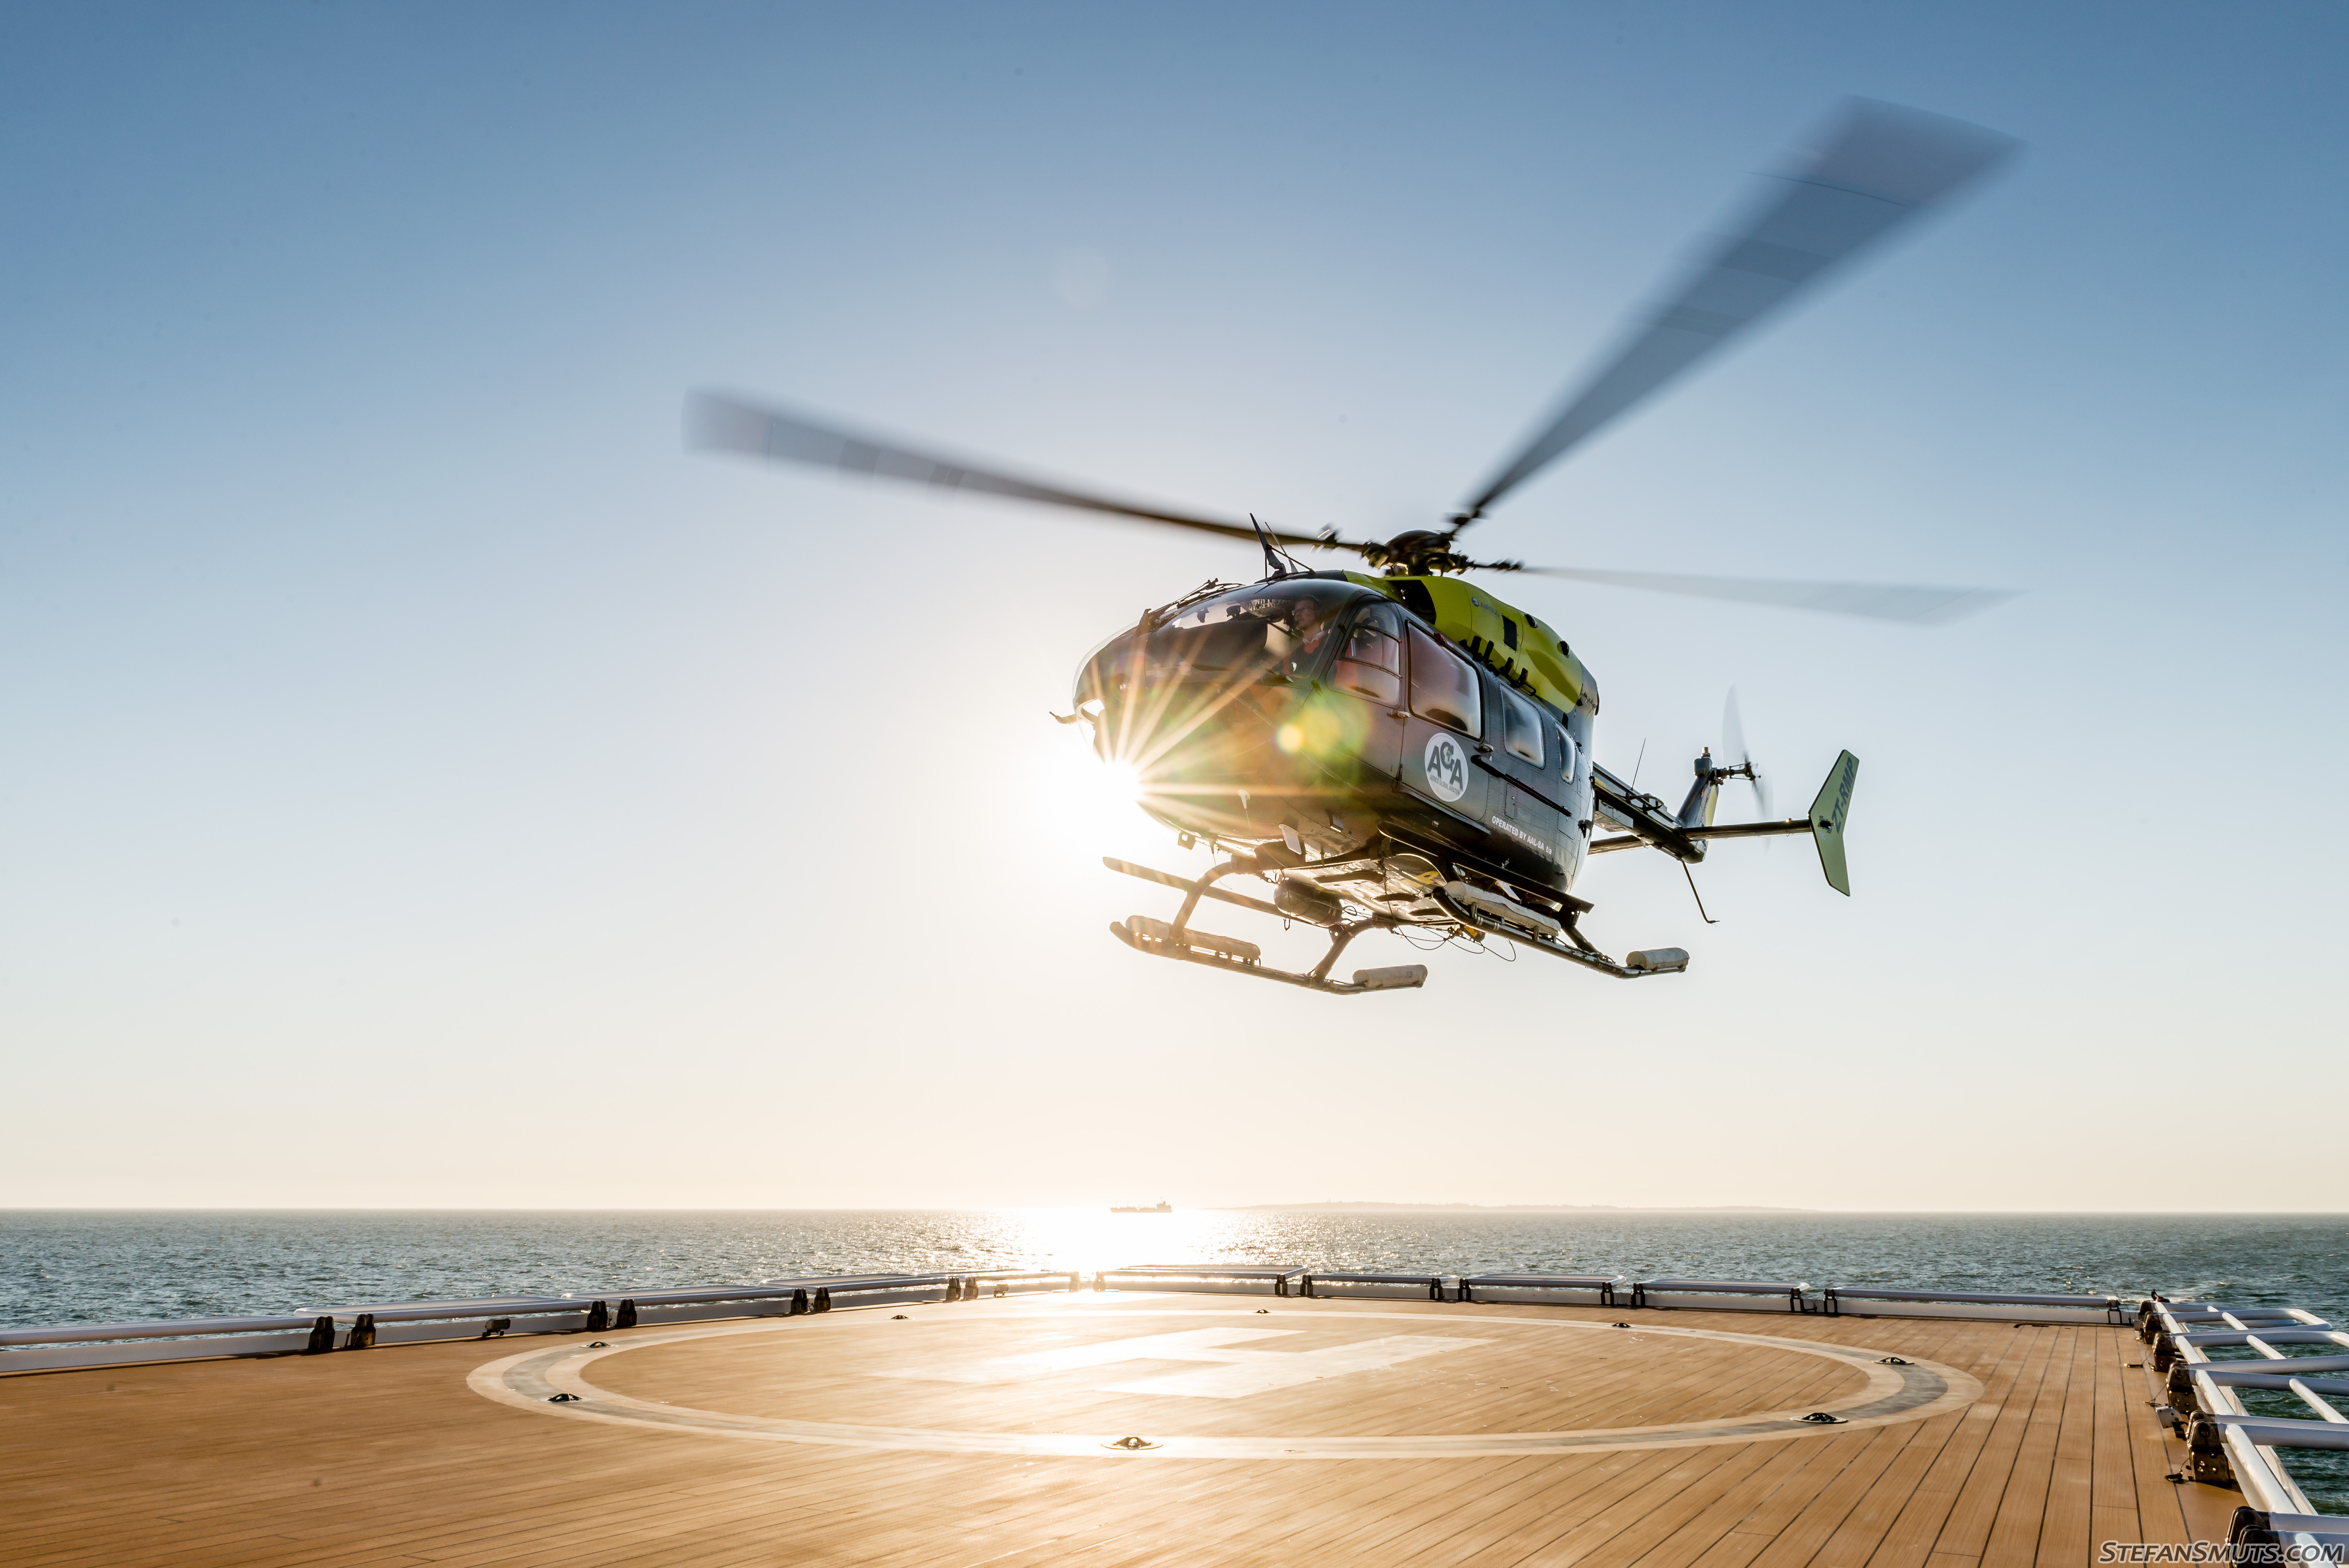 Aerios Global's newest aircraft, the EC145, hovering over a helipad by the water